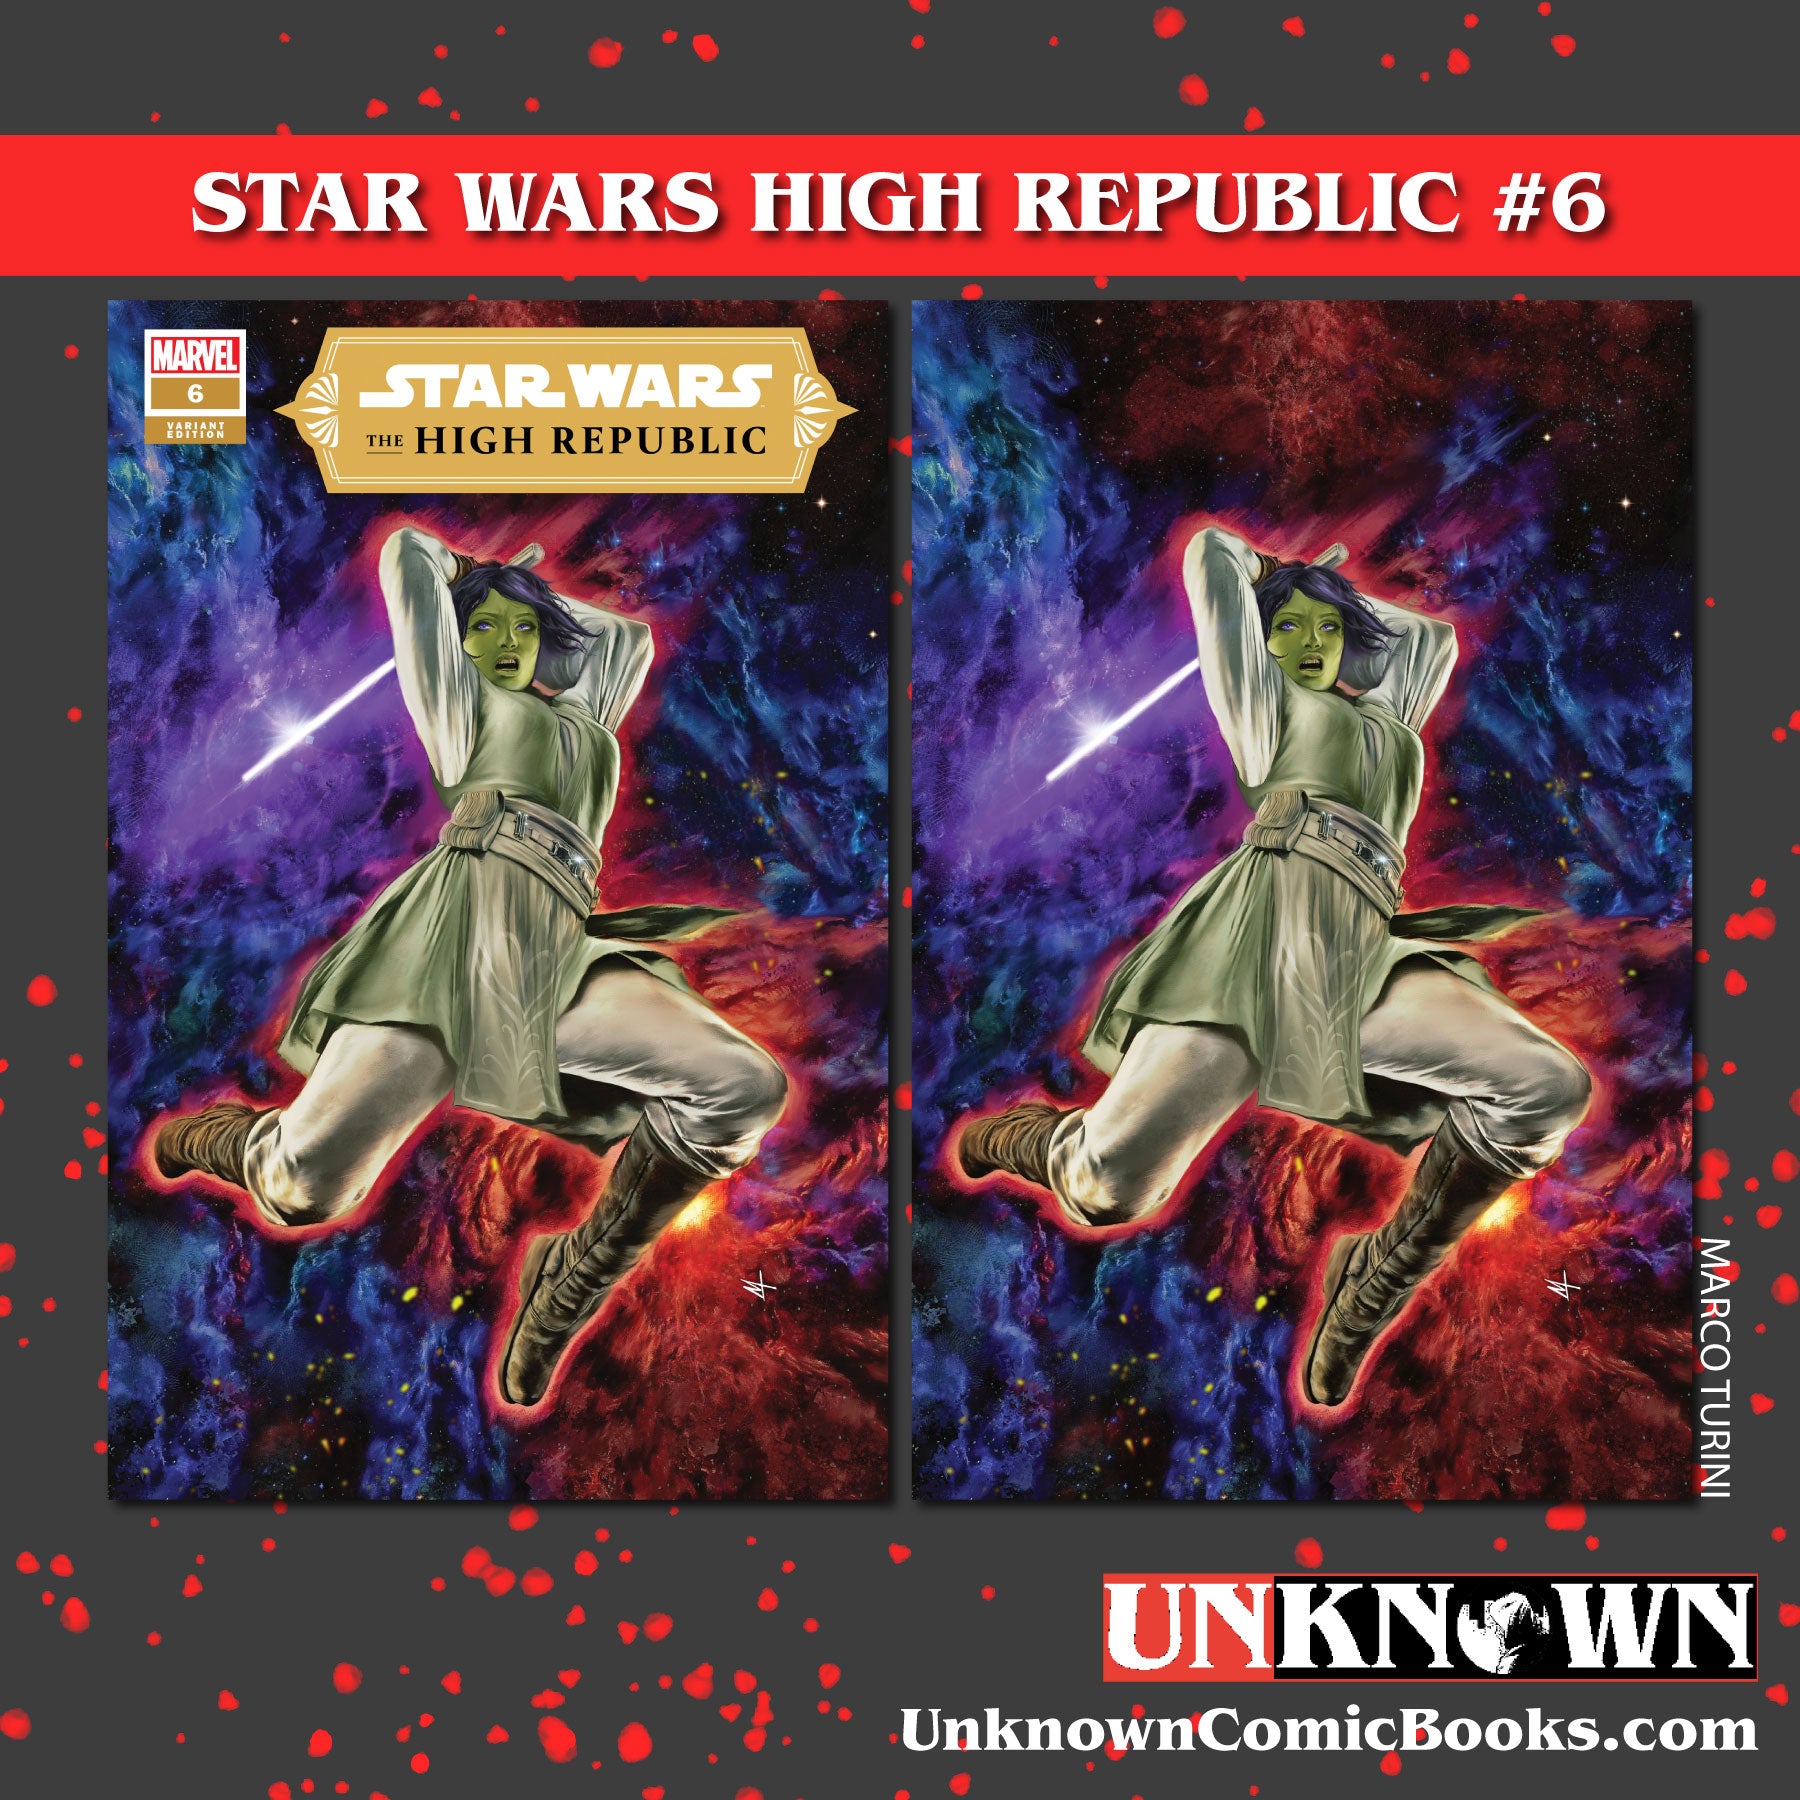 [2 PACK] STAR WARS HIGH REPUBLIC #6 UNKNOWN COMICS MARCO TURINI EXCLUSIVE VAR (06/30/2021)